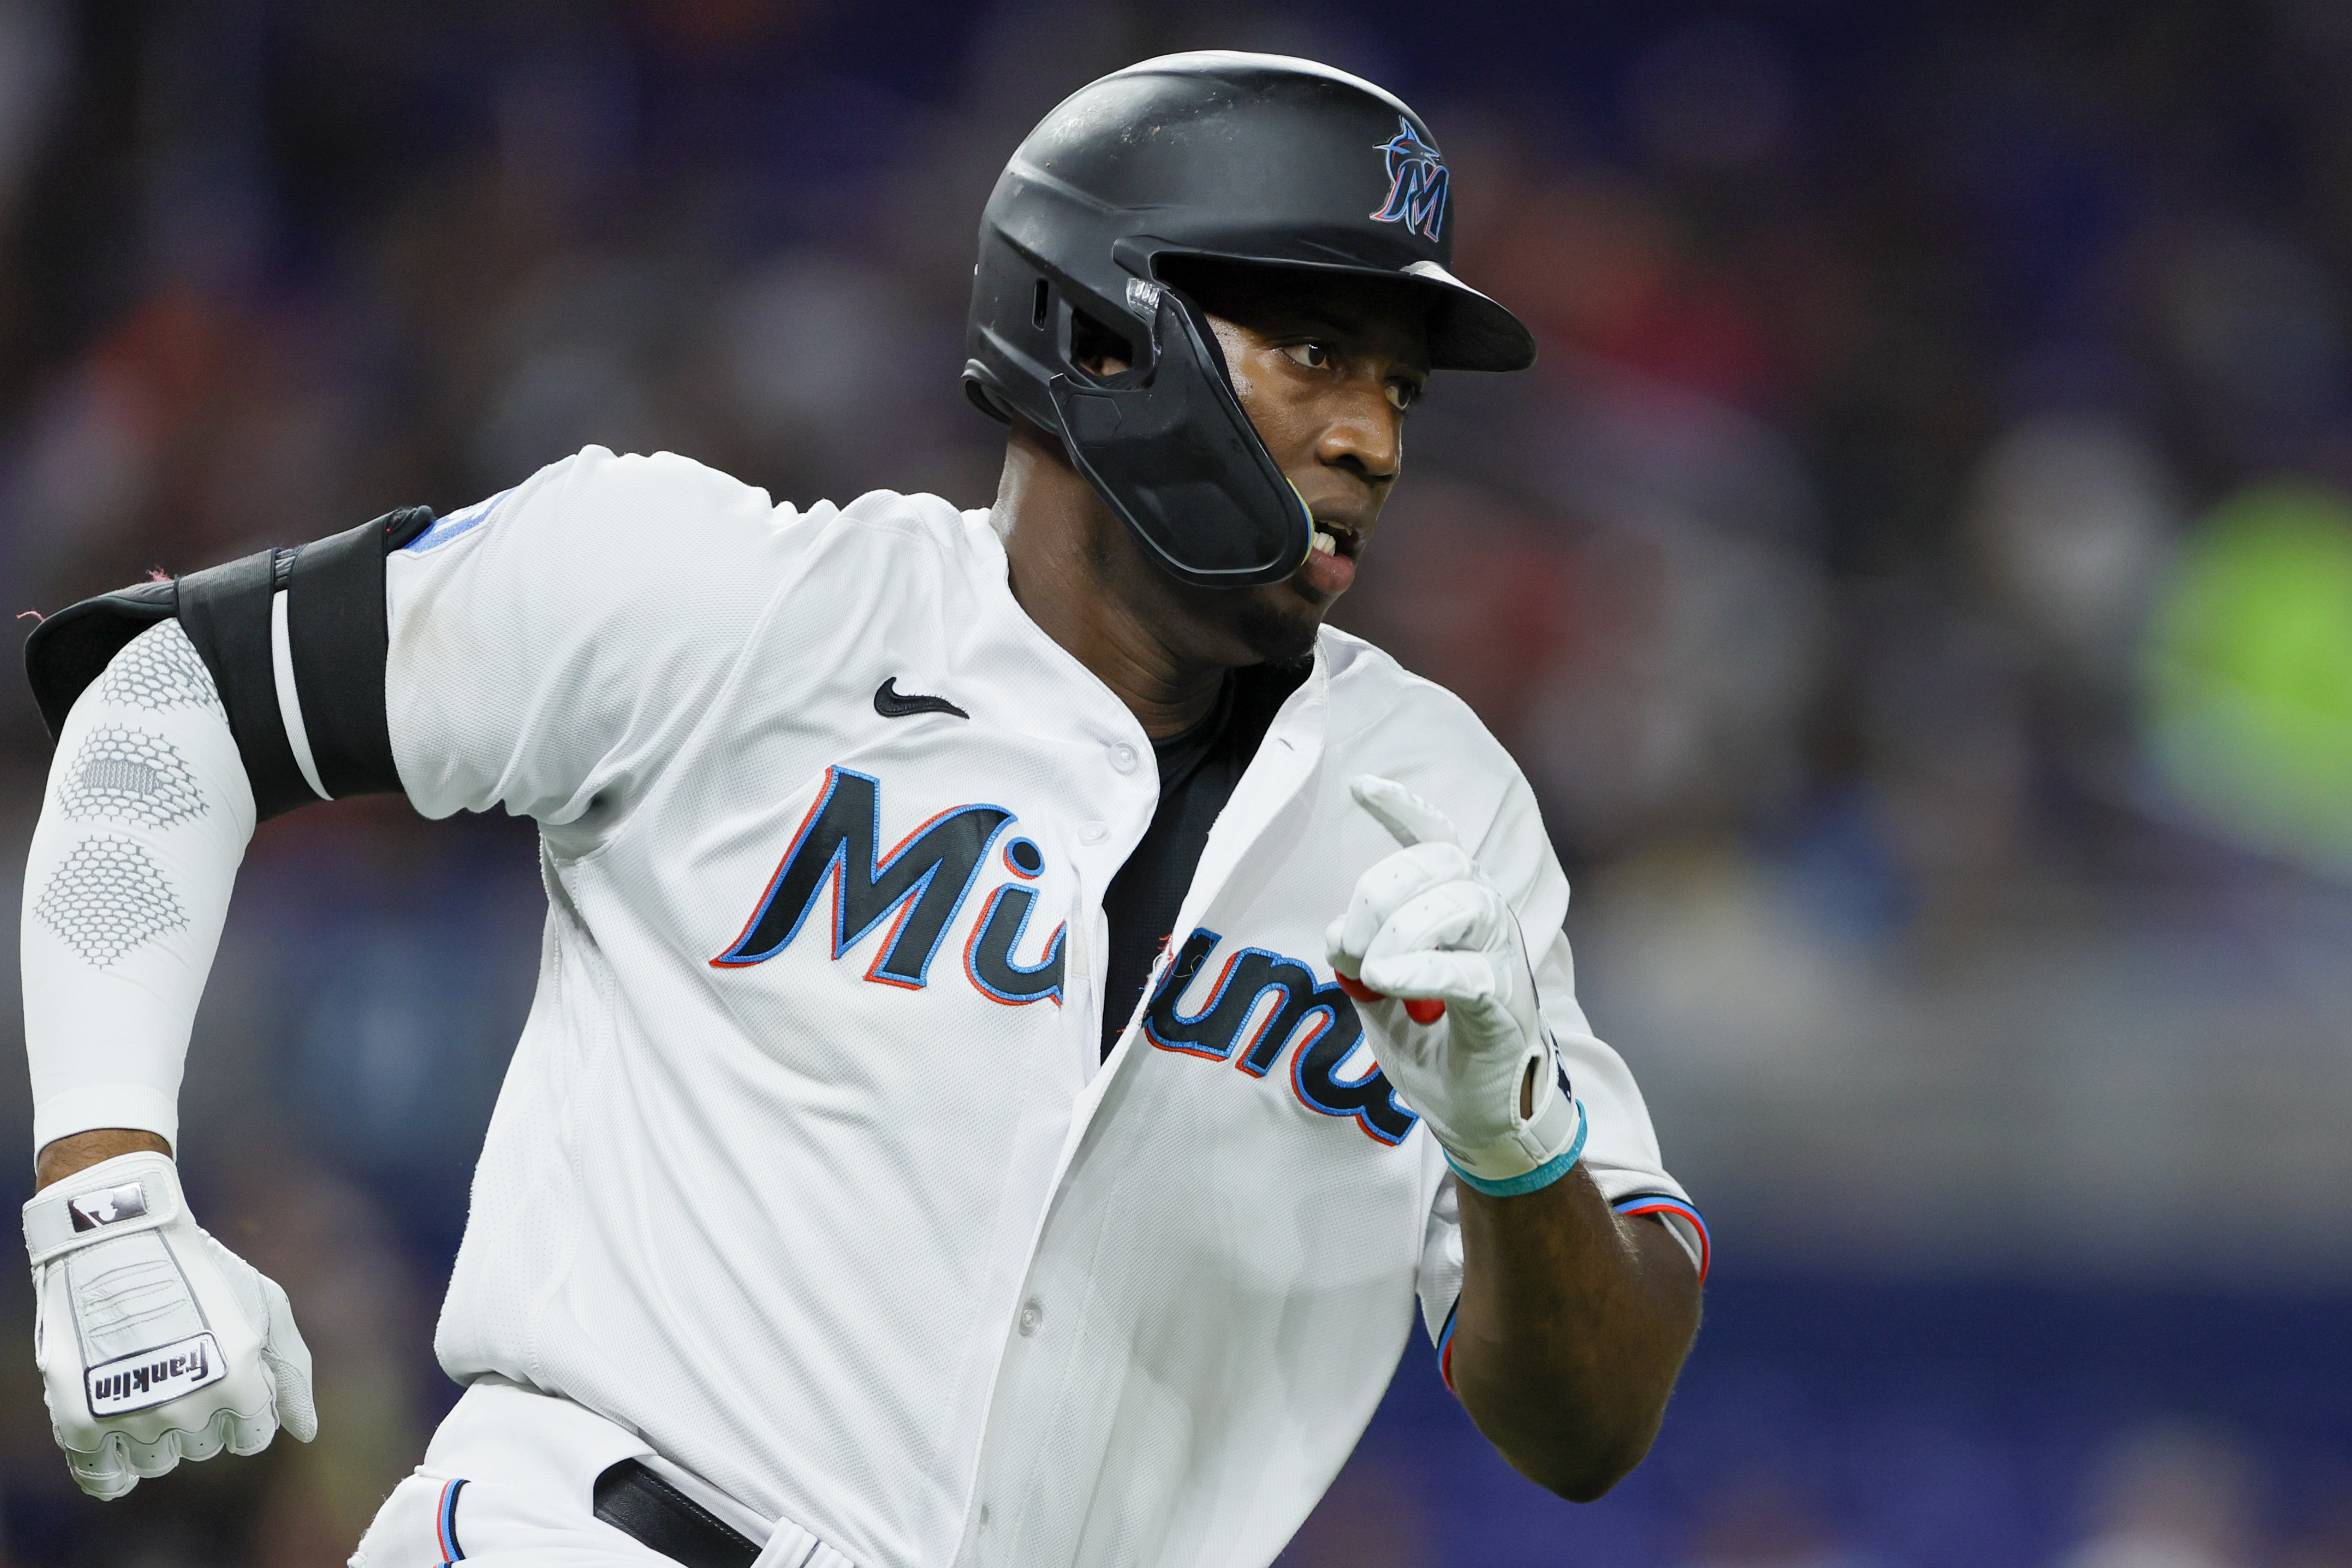 Luis Arraez goes 5 for 5 and lifts average to .400 as the Marlins rout the  Blue Jays 11-0 - NBC Sports